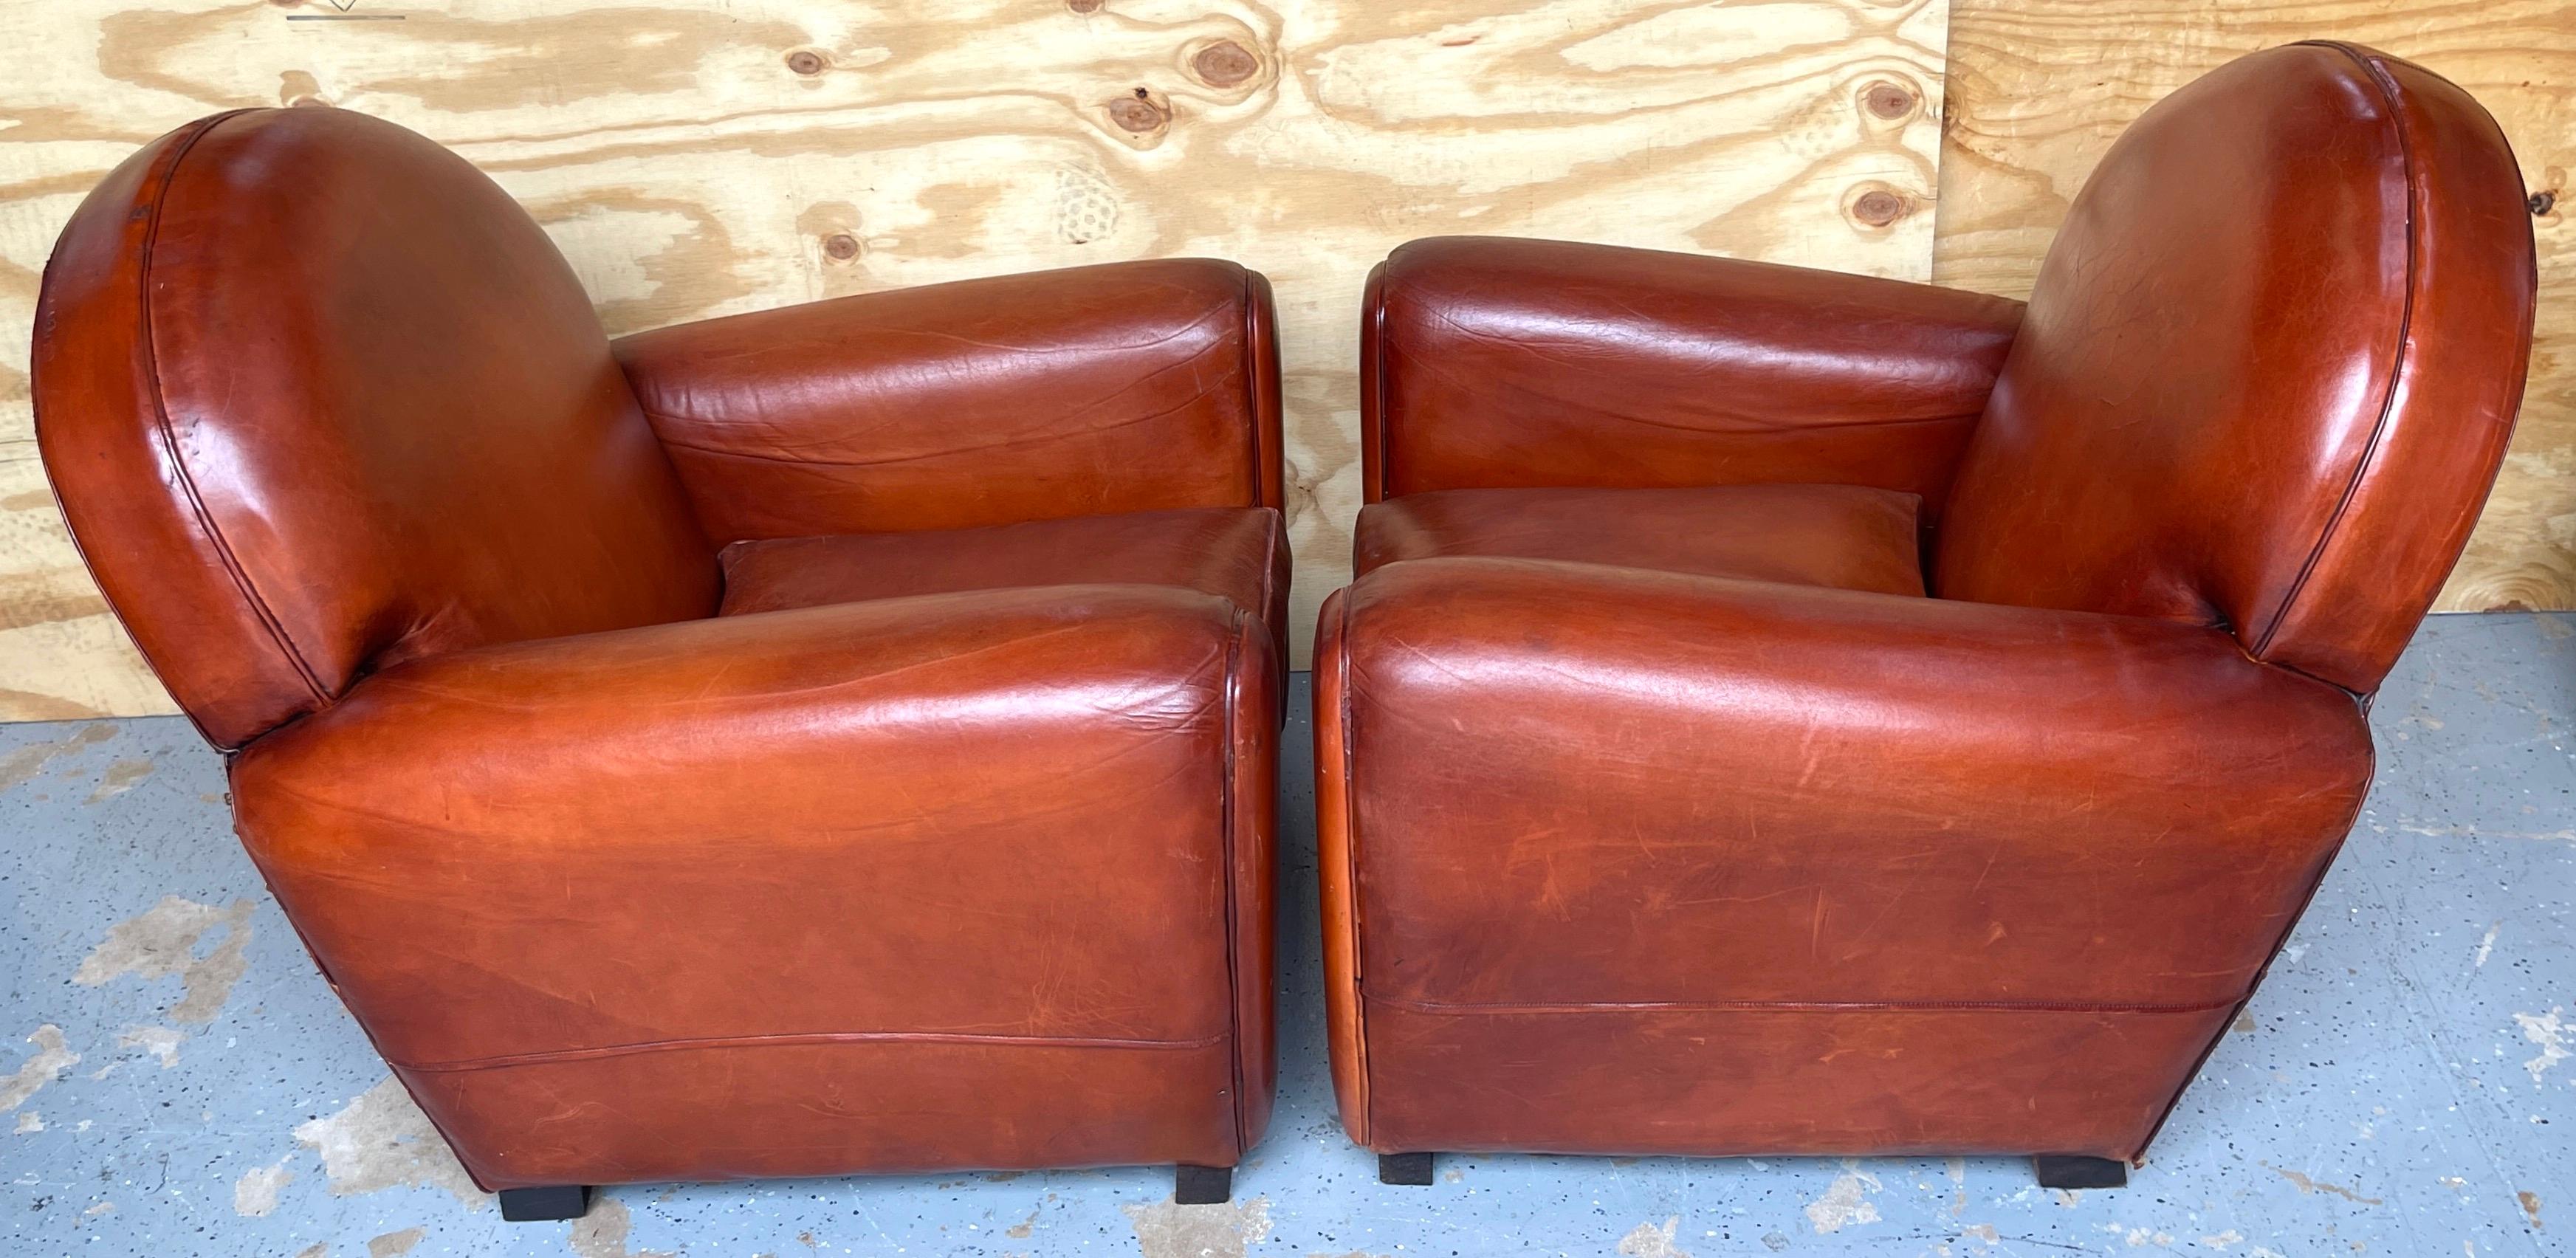 20th Century Pair of French Art Deco Saddle Leather Chairs For Sale